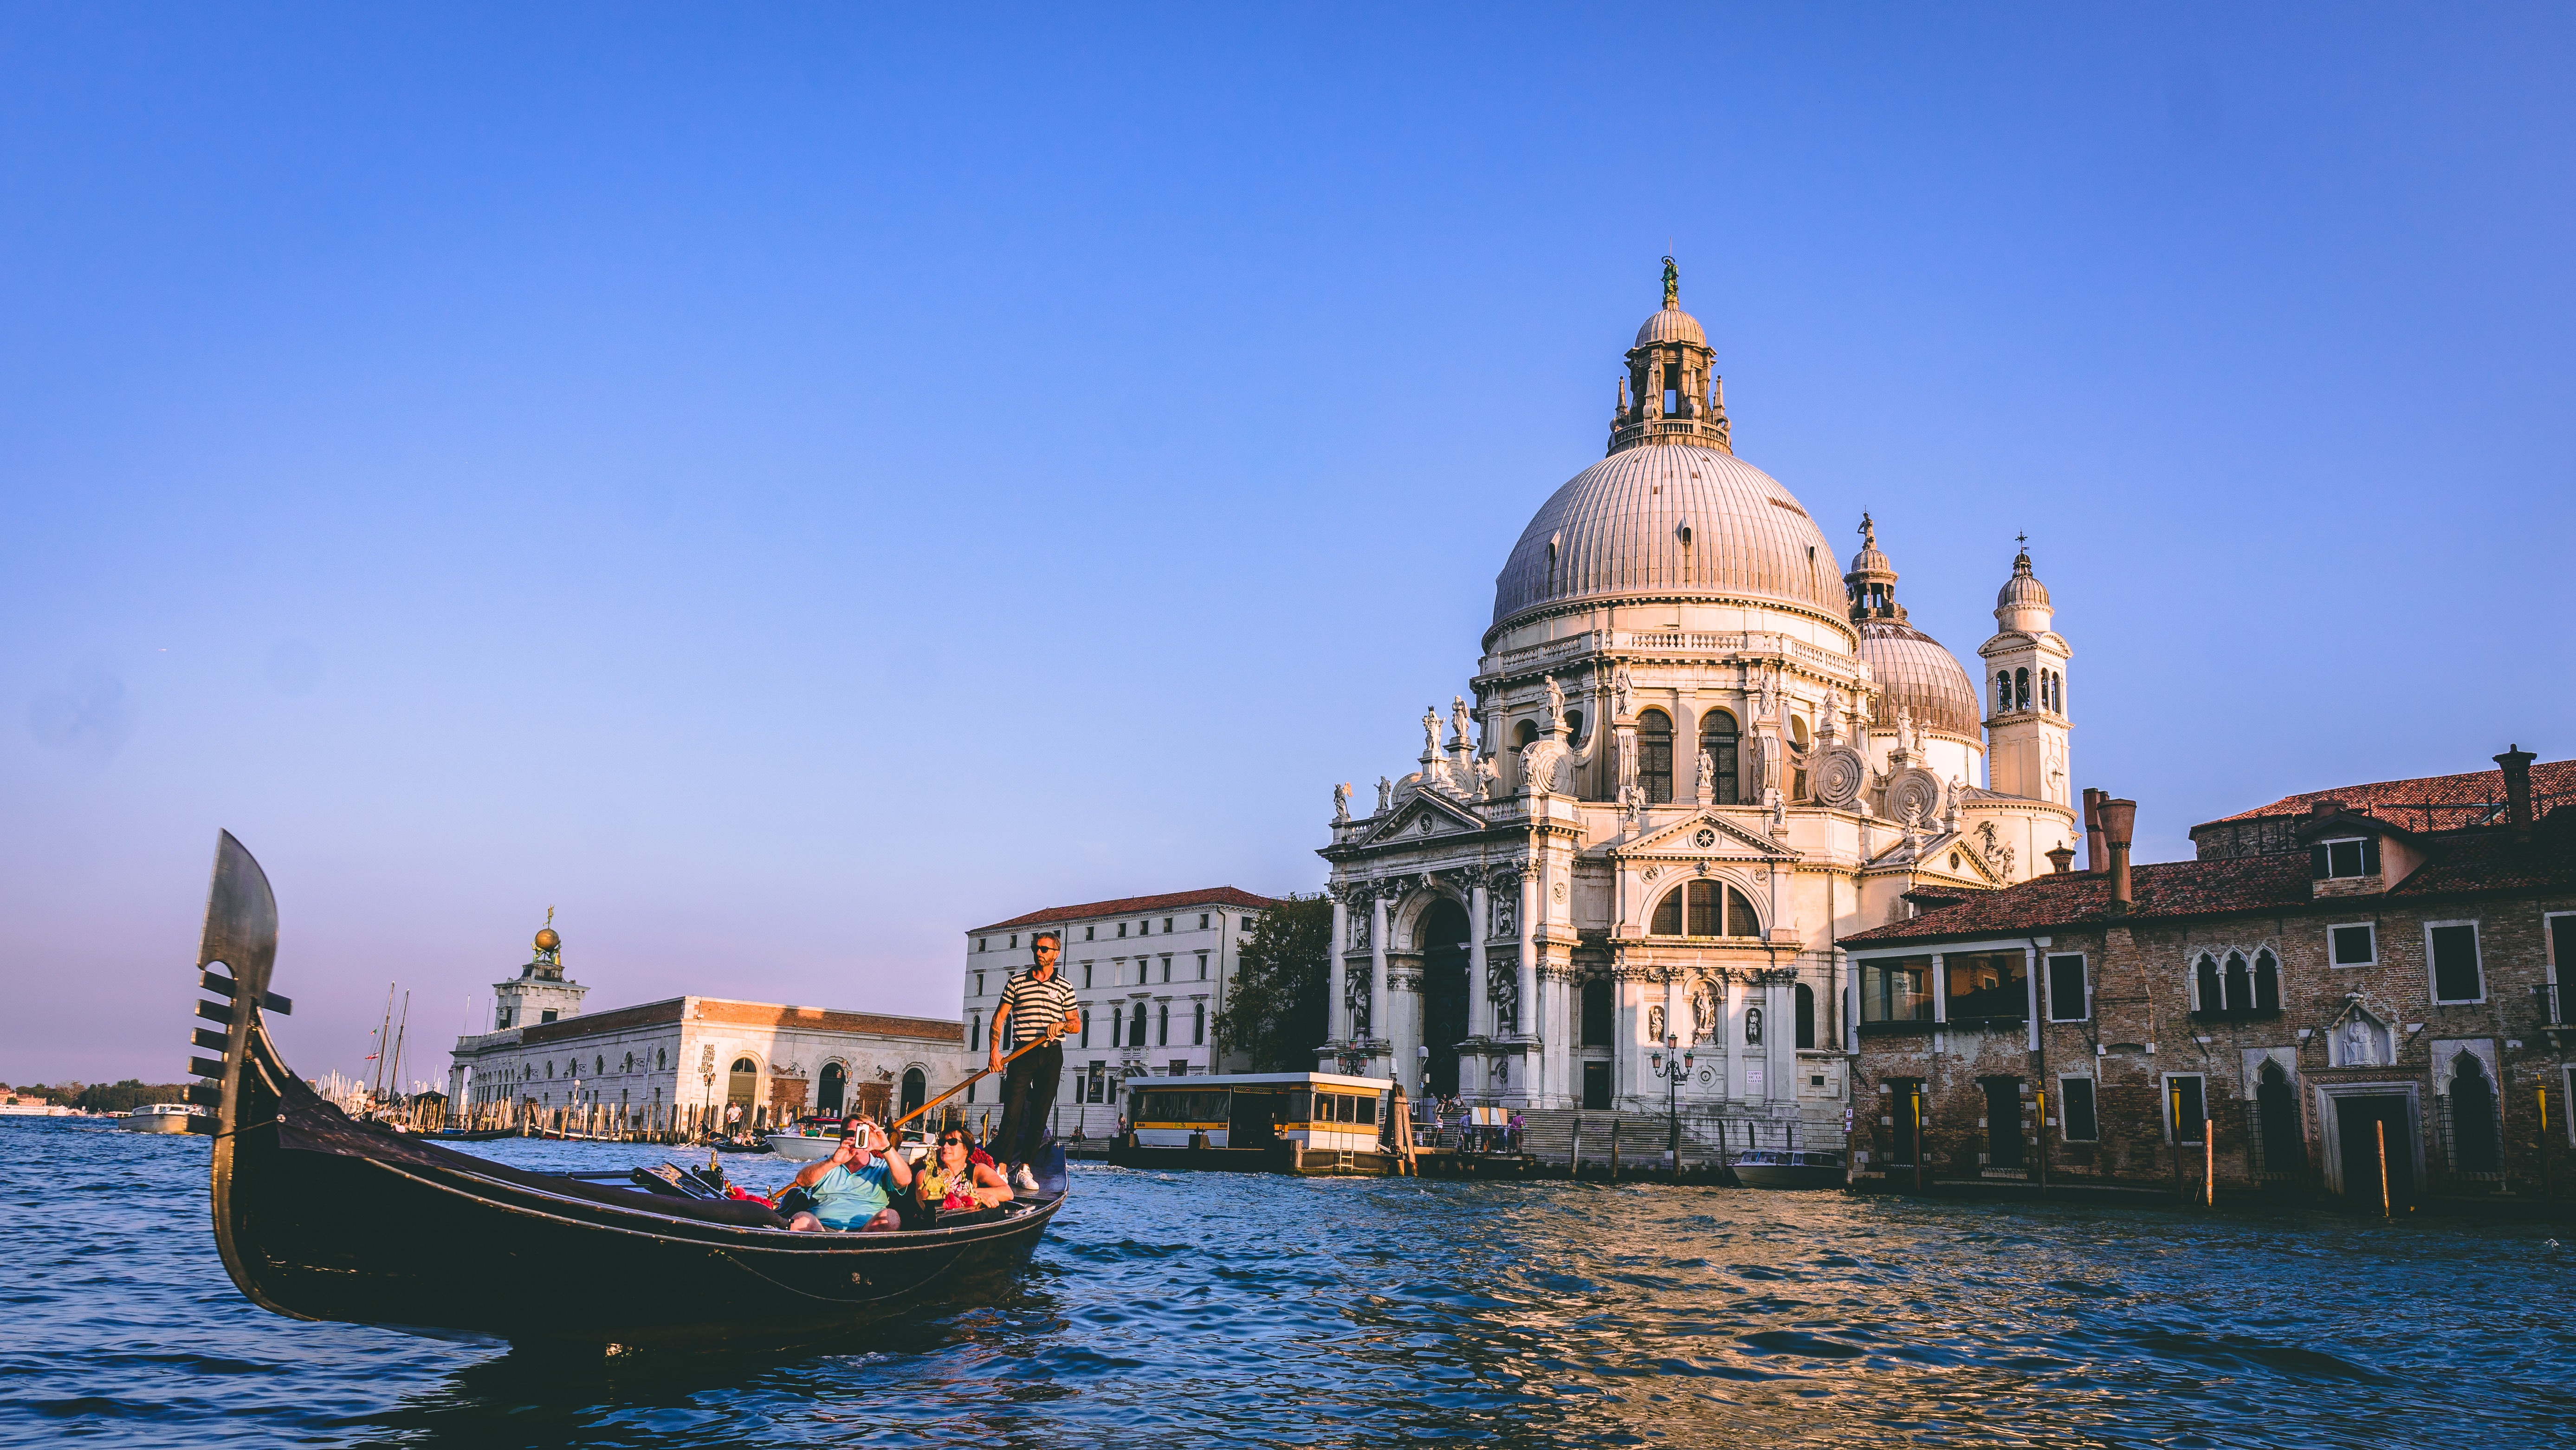 Venice: the first city of art to visit in the world